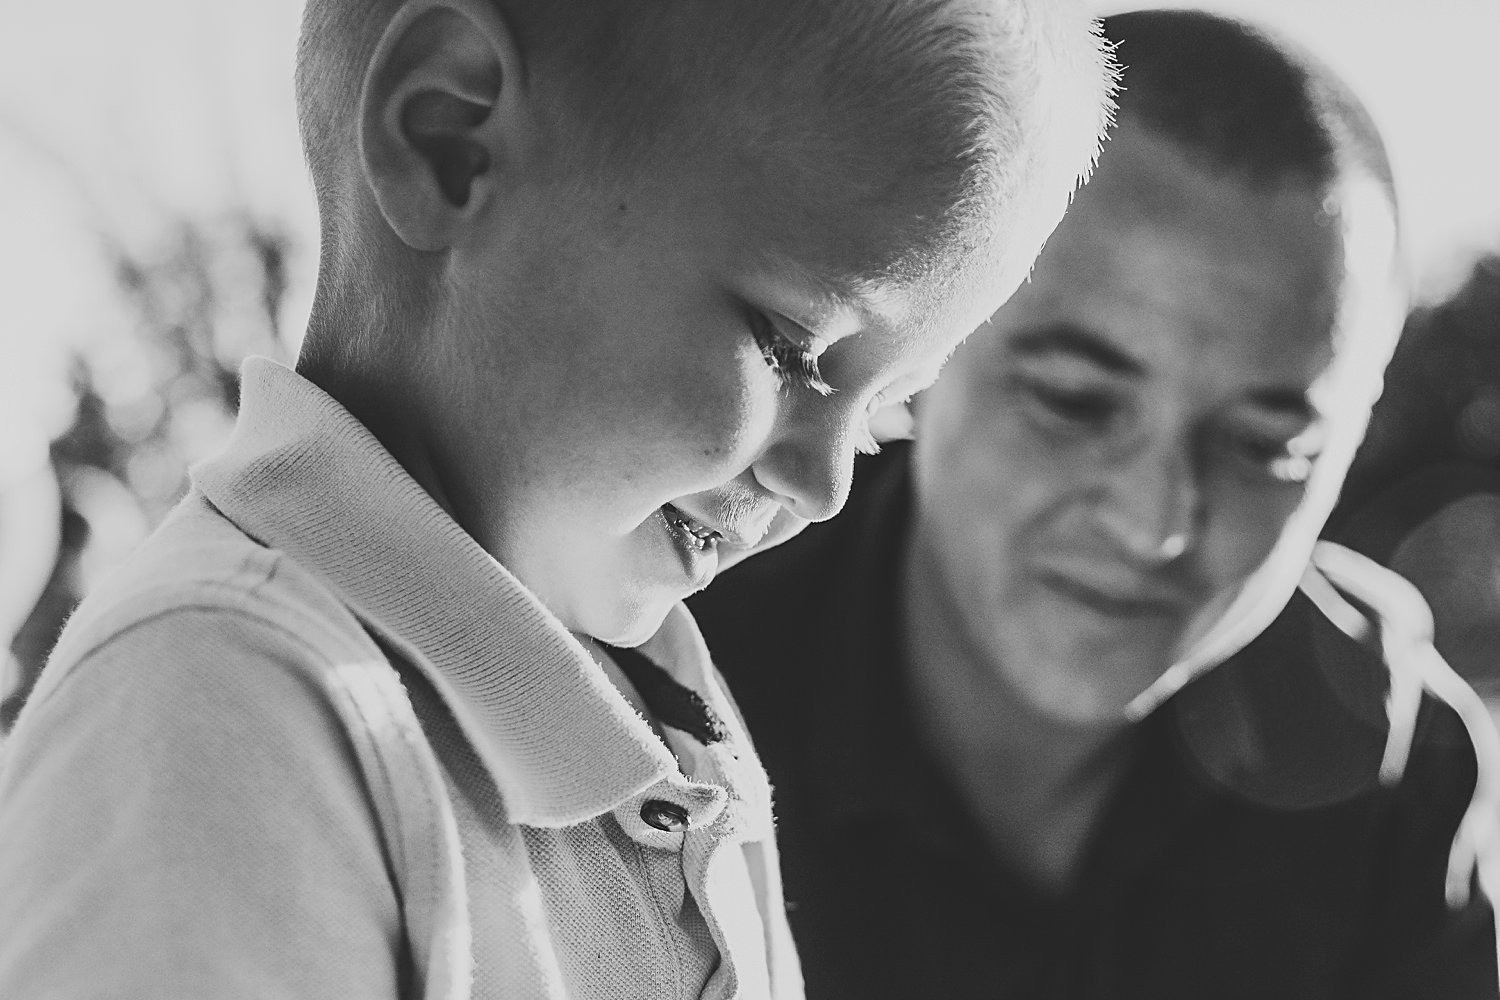 Candid family portrait of dad with young boy